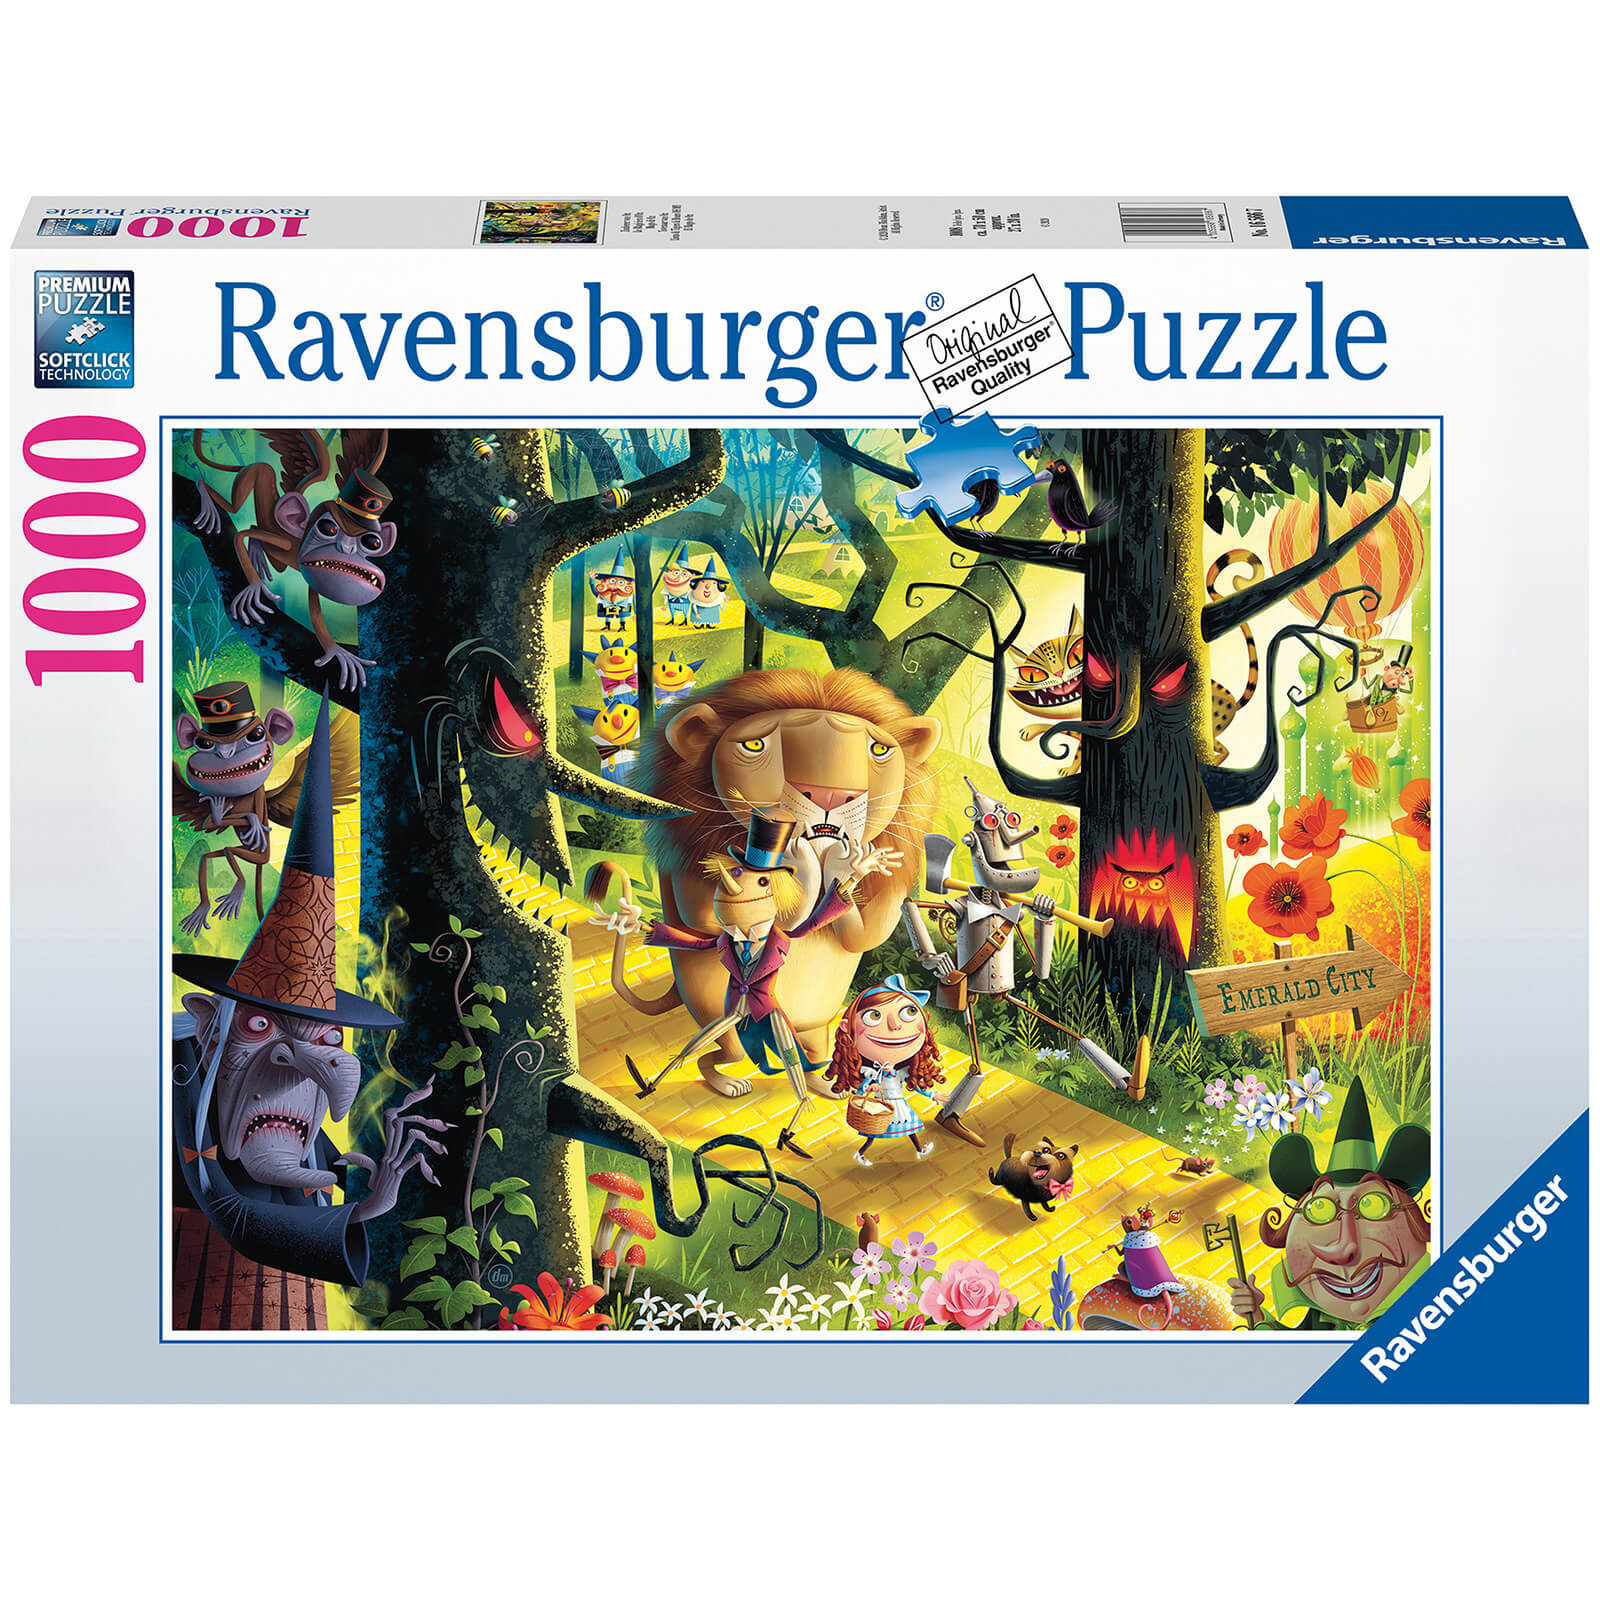 Ravensburger Lions, Tigers and Bears, Oh My! (Wizard of Oz) 1000 piece Jigsaw Puzzle